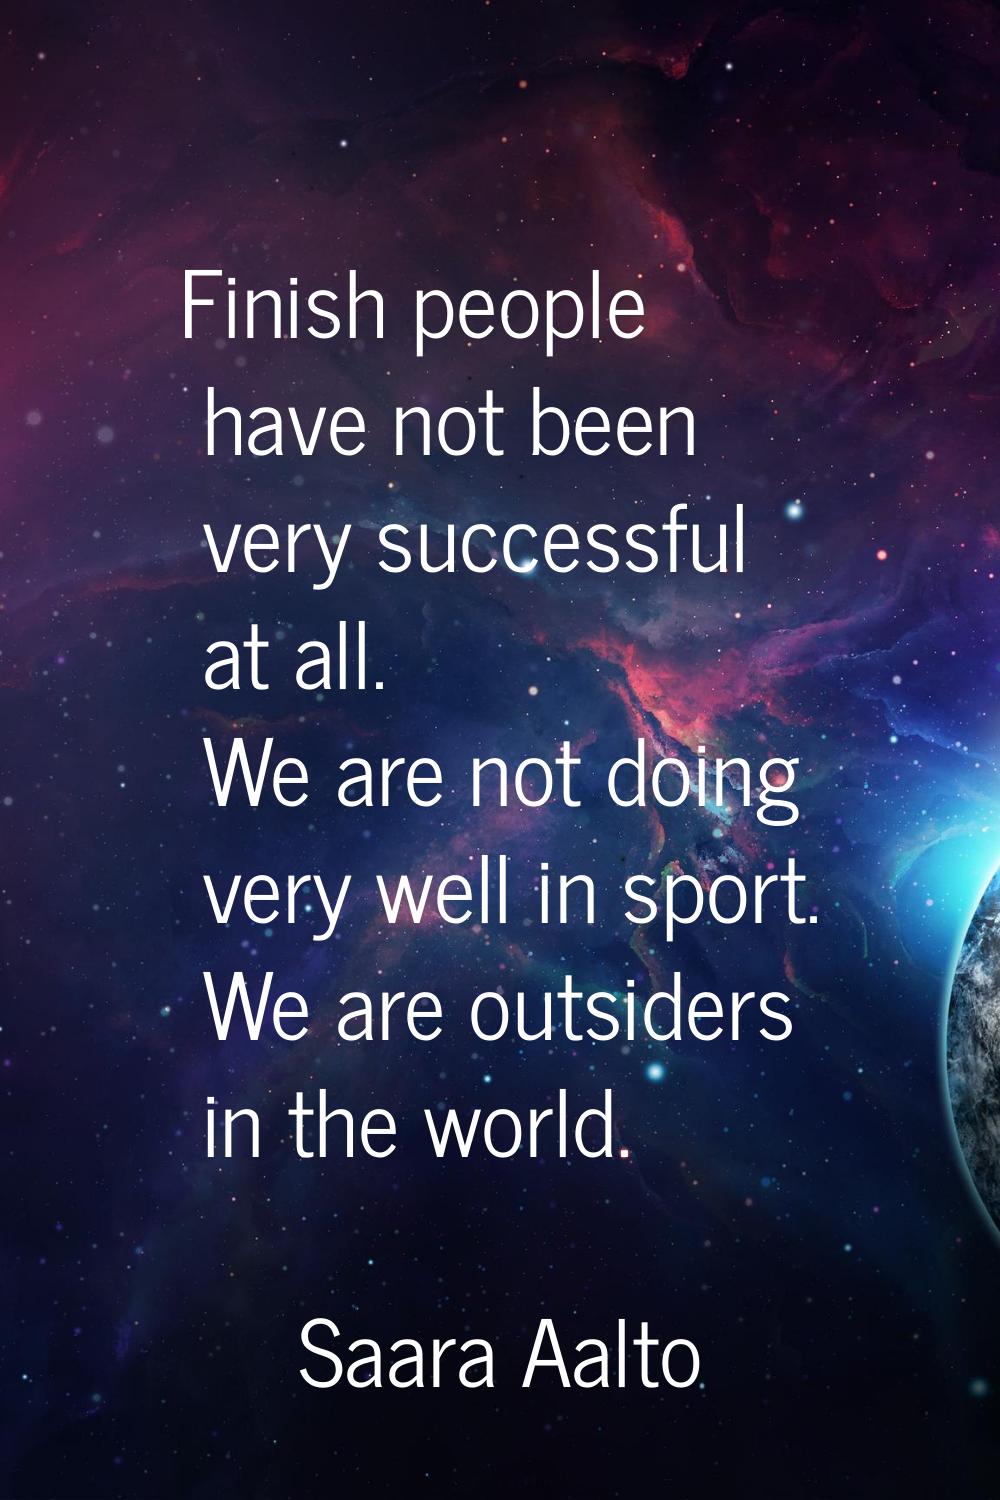 Finish people have not been very successful at all. We are not doing very well in sport. We are out